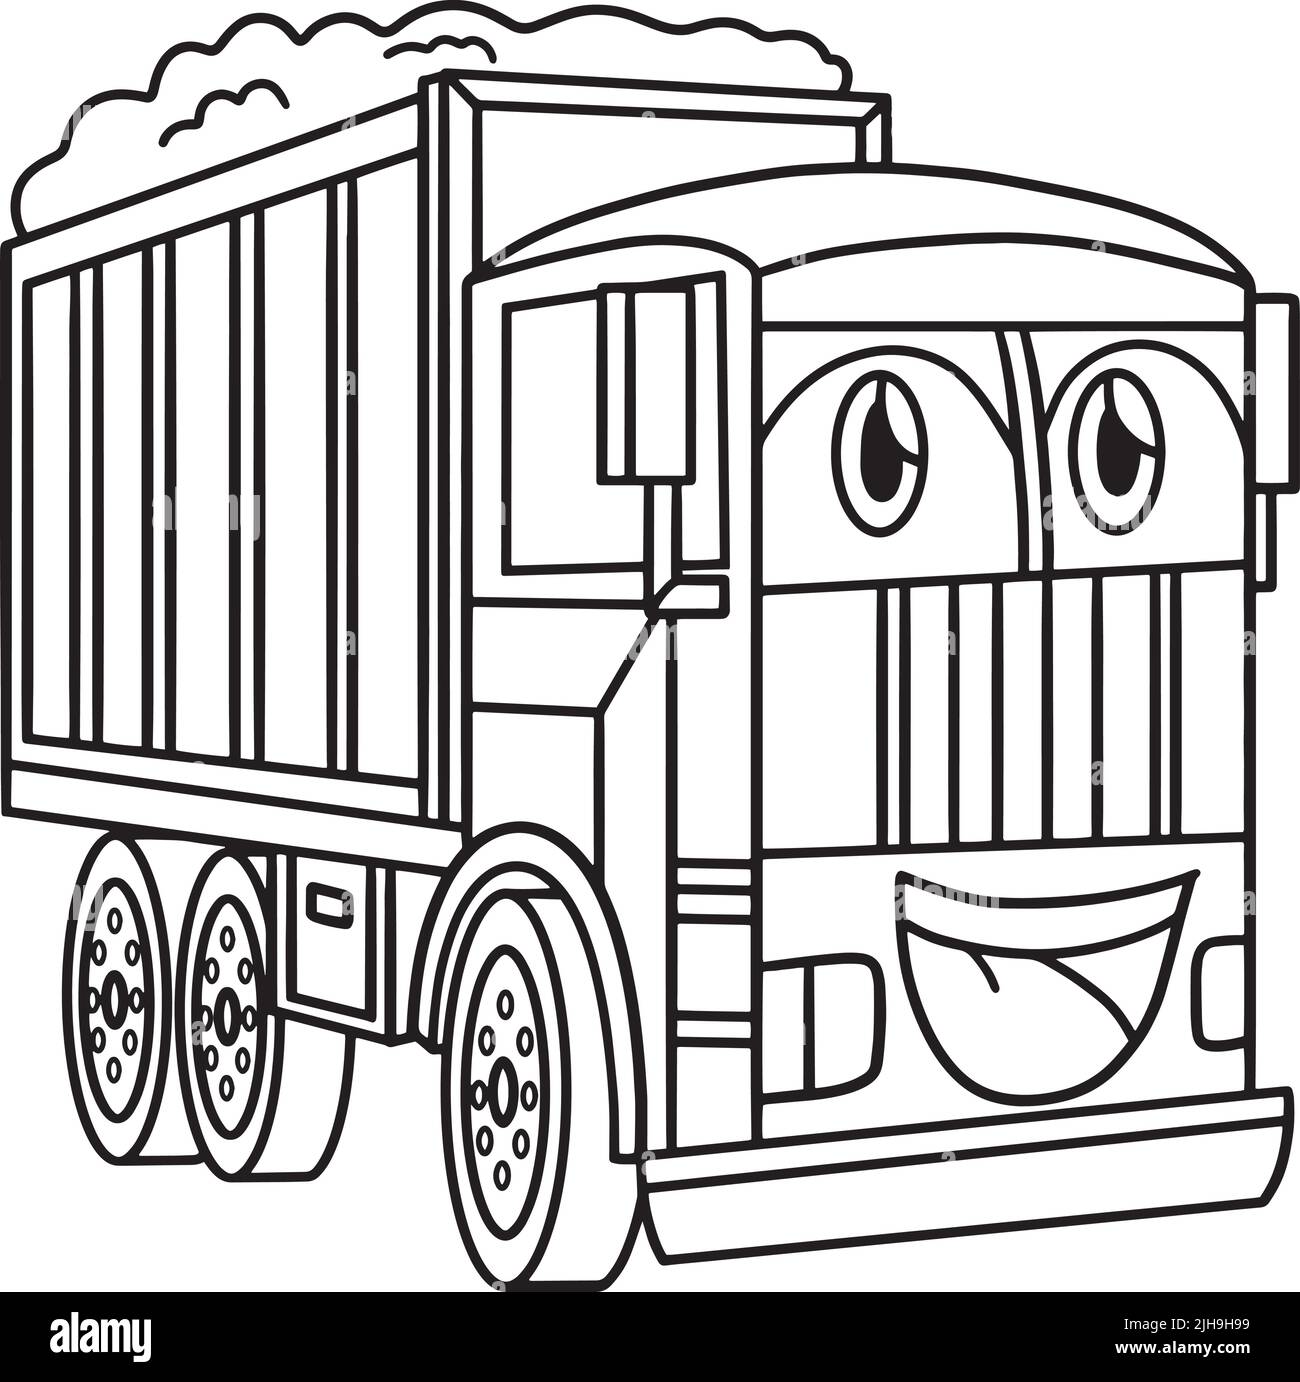 Dump truck outline Cut Out Stock Images & Pictures - Alamy